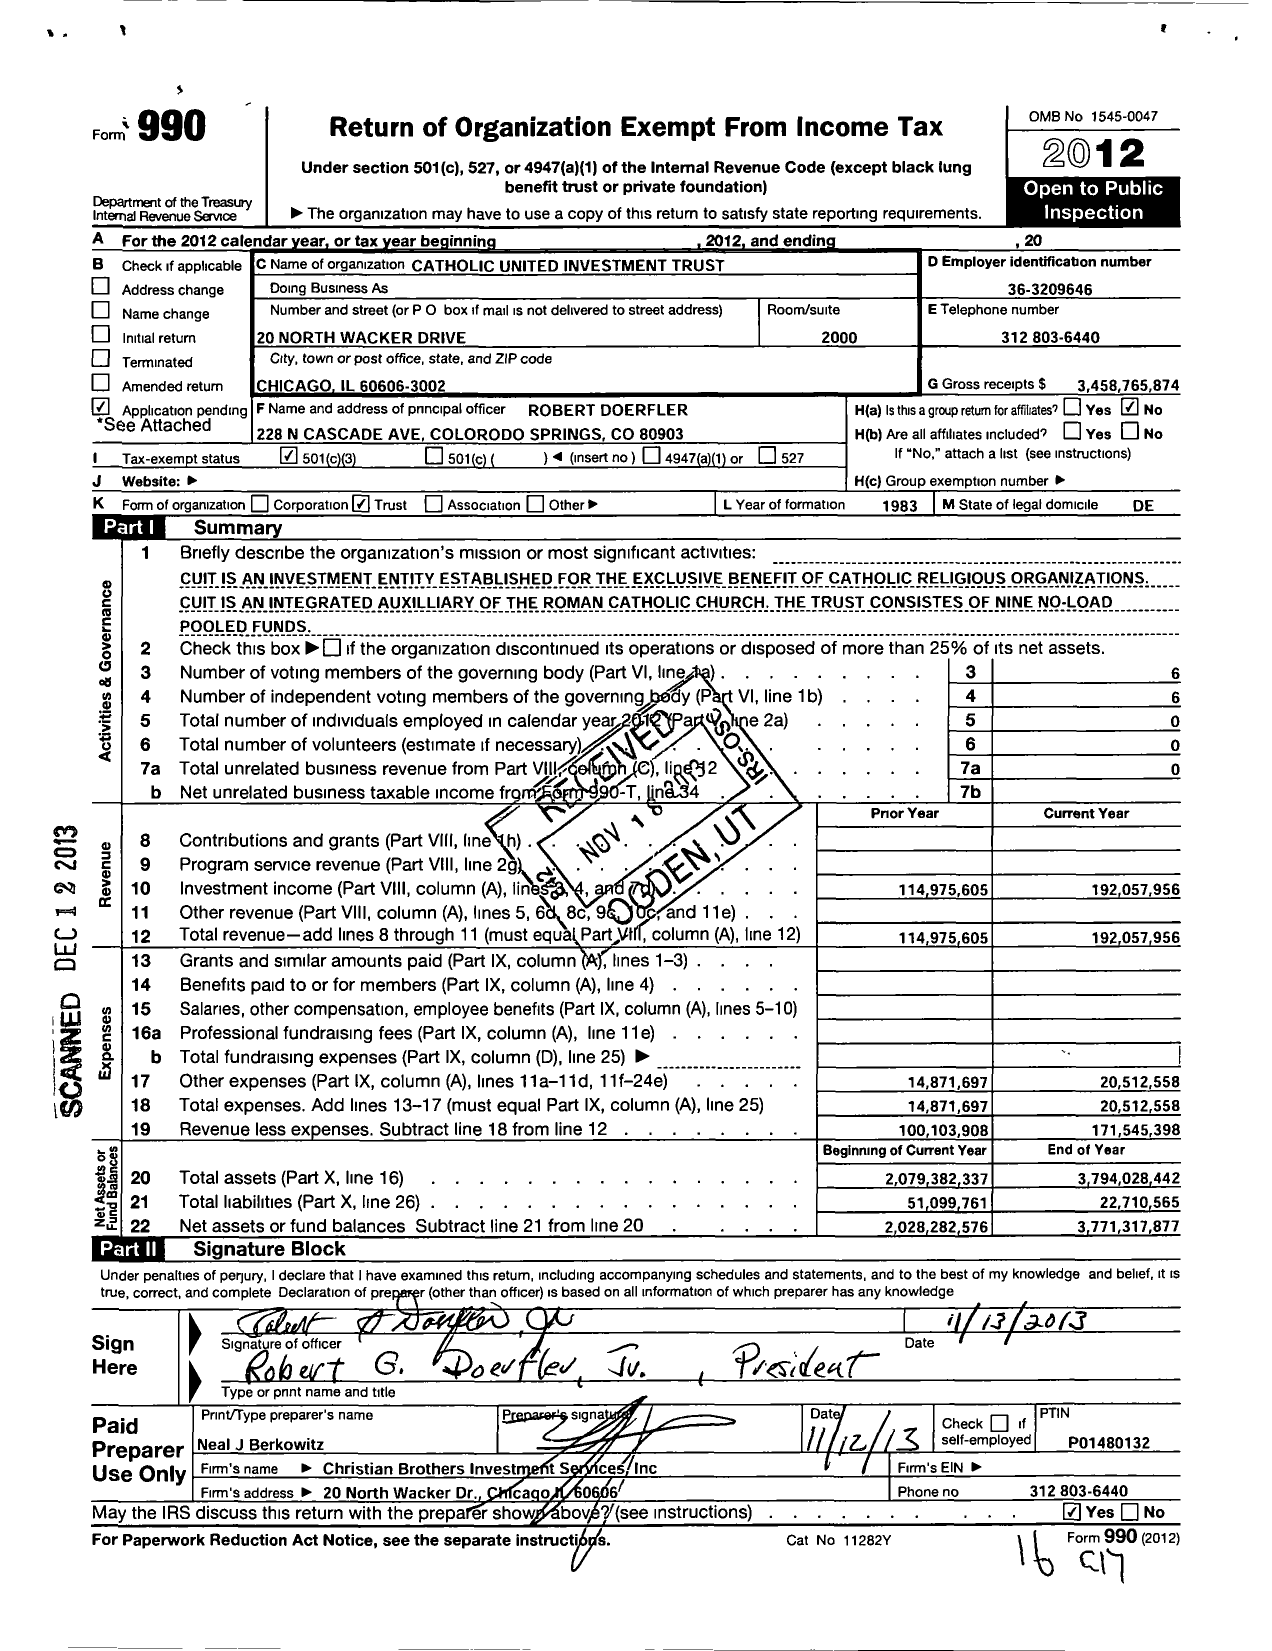 Image of first page of 2012 Form 990 for Catholic United Investment Trust (CUIT)